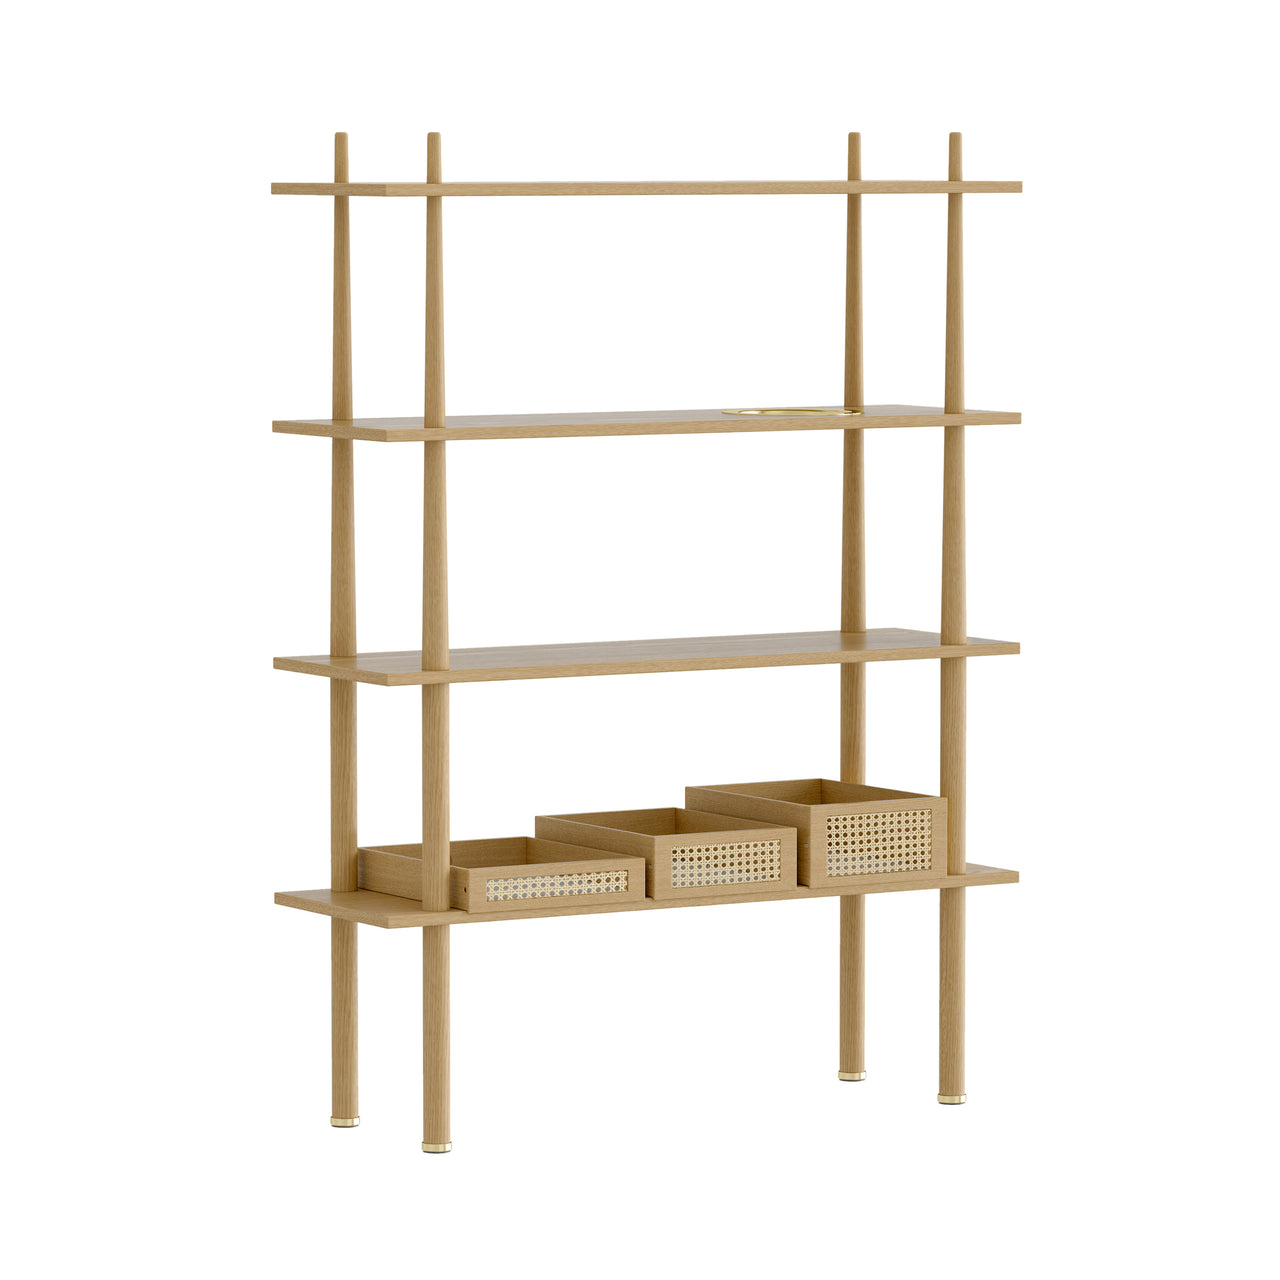 Stories Shelving: Oak + Excluded